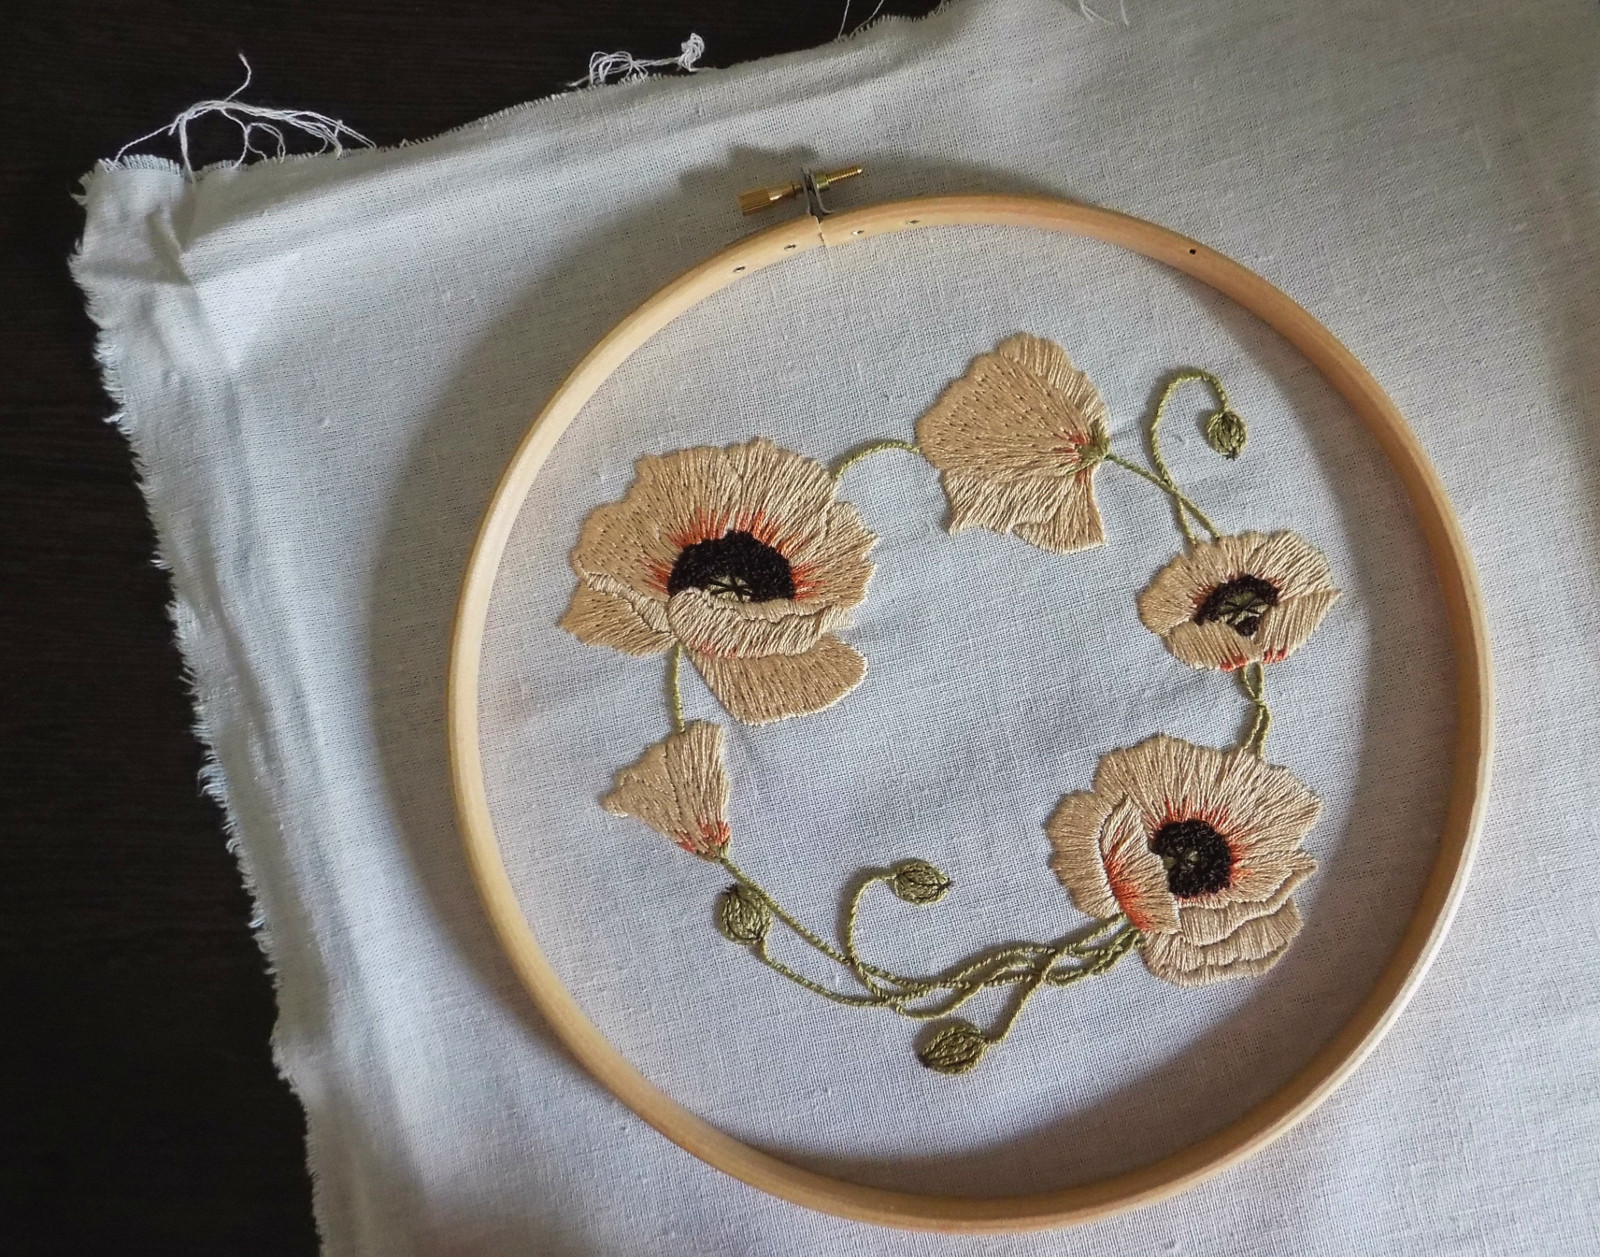 Hand Embroidery. Stitches at a glance.